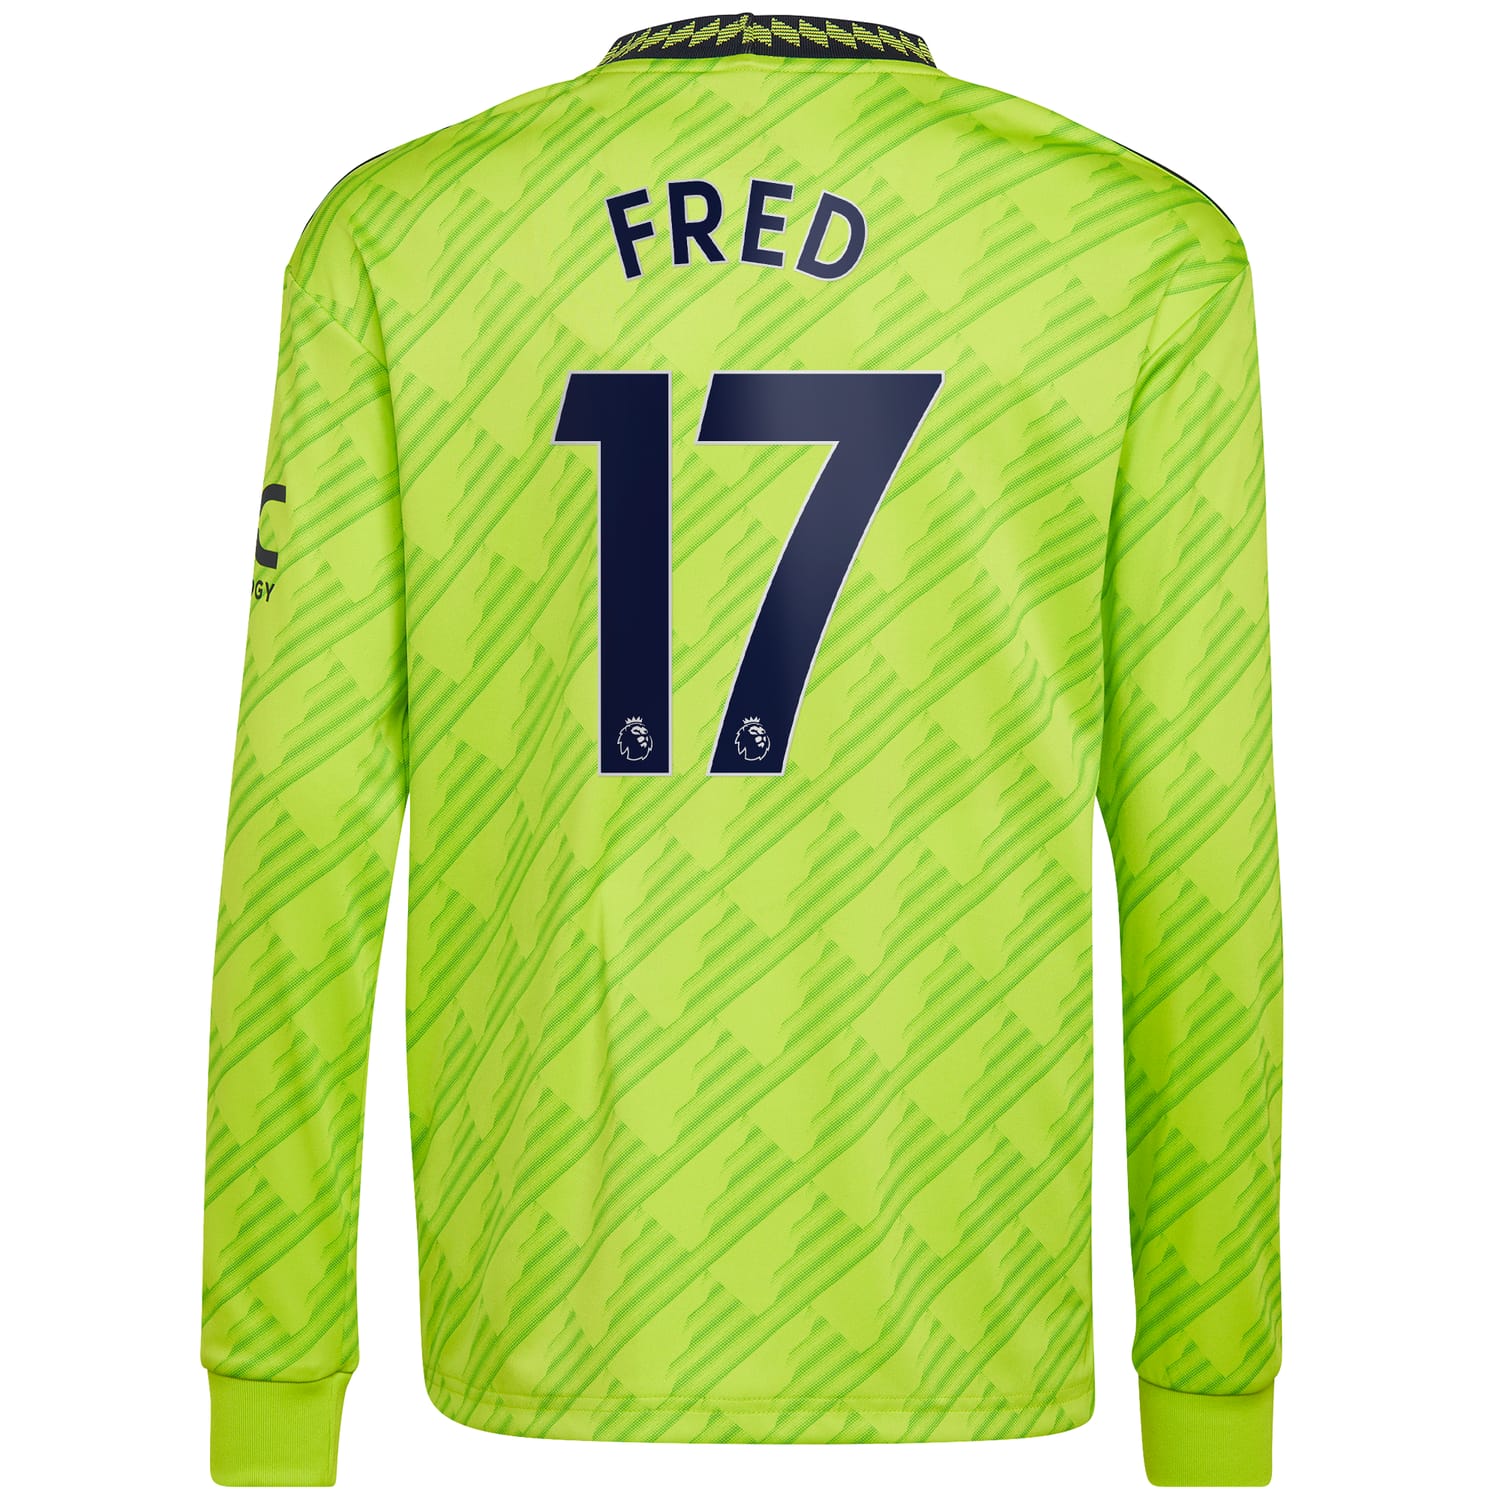 Premier League Manchester United Third Jersey Shirt Long Sleeve 2022-23 player Fred 17 printing for Men